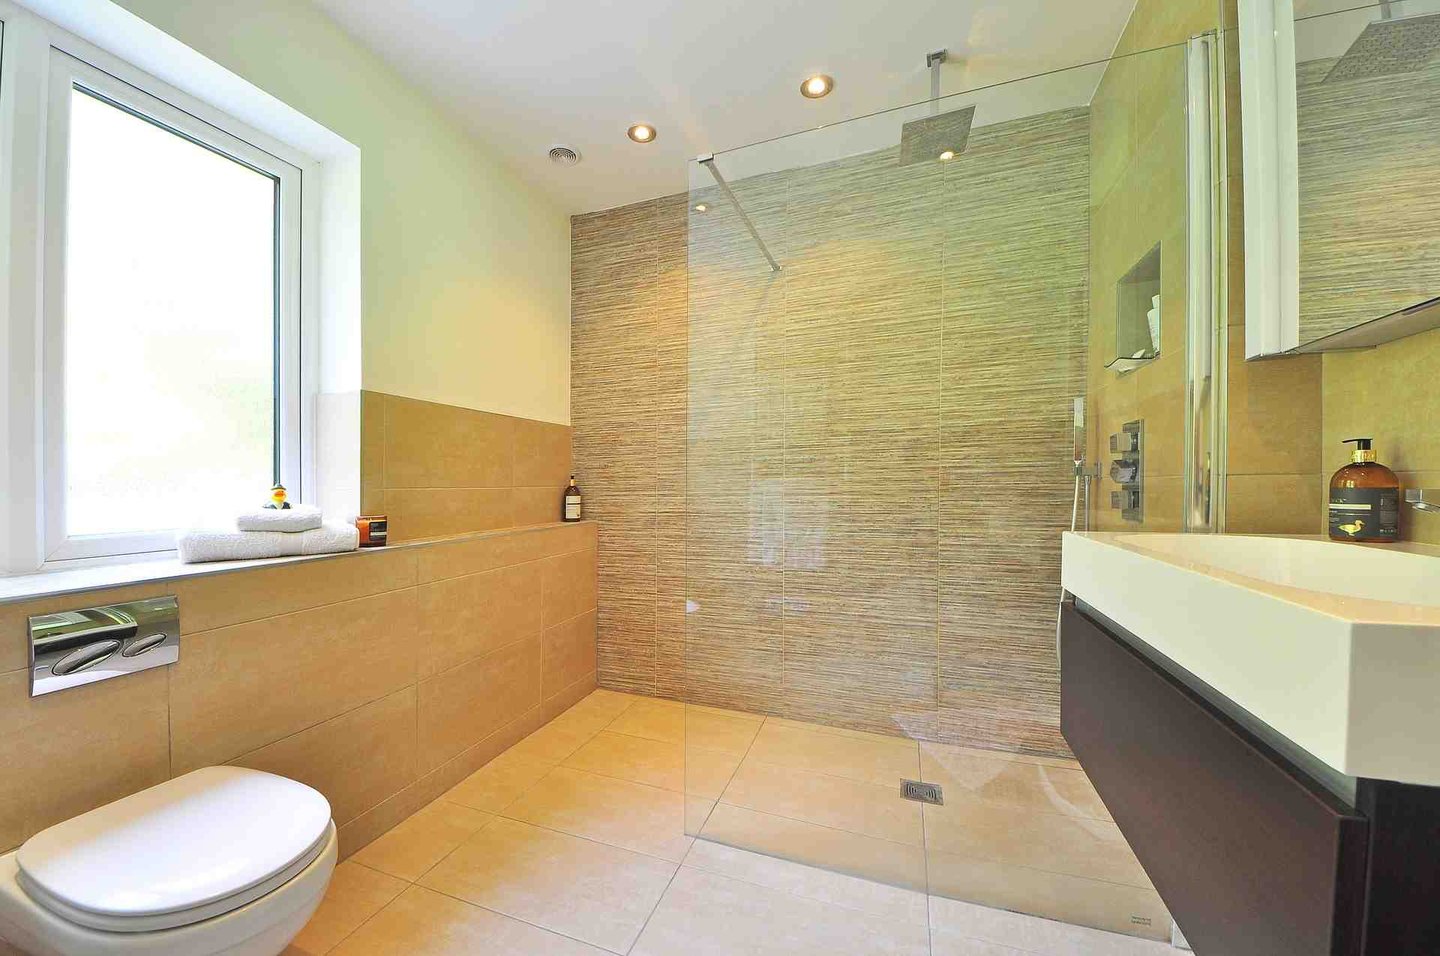 Upscale Bathroom Addition With Frameless Glass Enclosure For Walk-In Shower. 